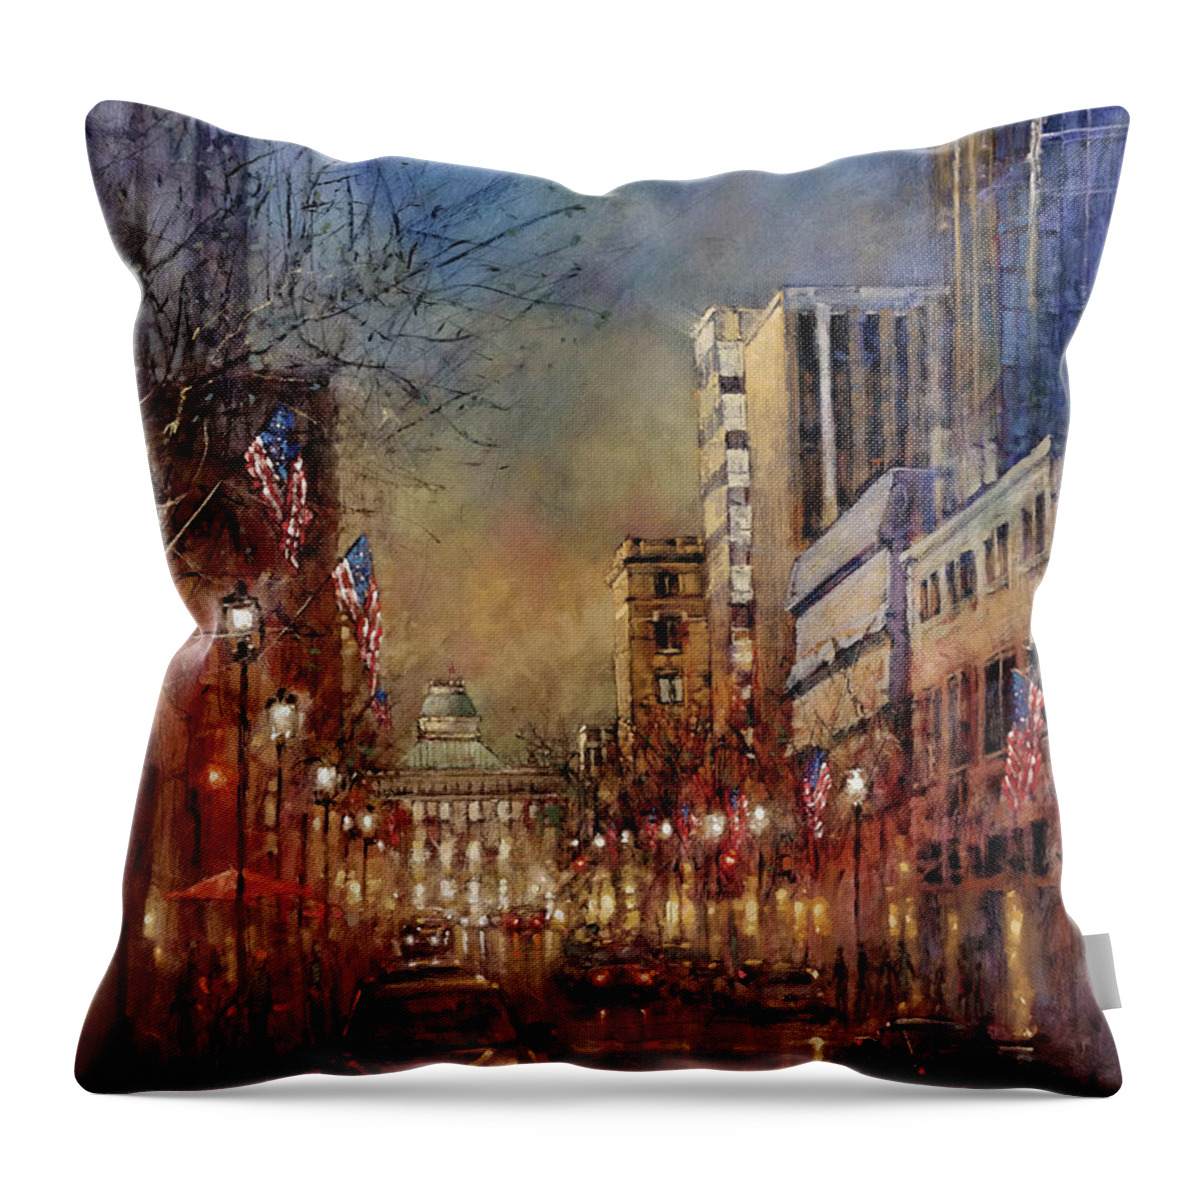 Raleigh Throw Pillow featuring the painting Raleigh Light by Dan Nelson